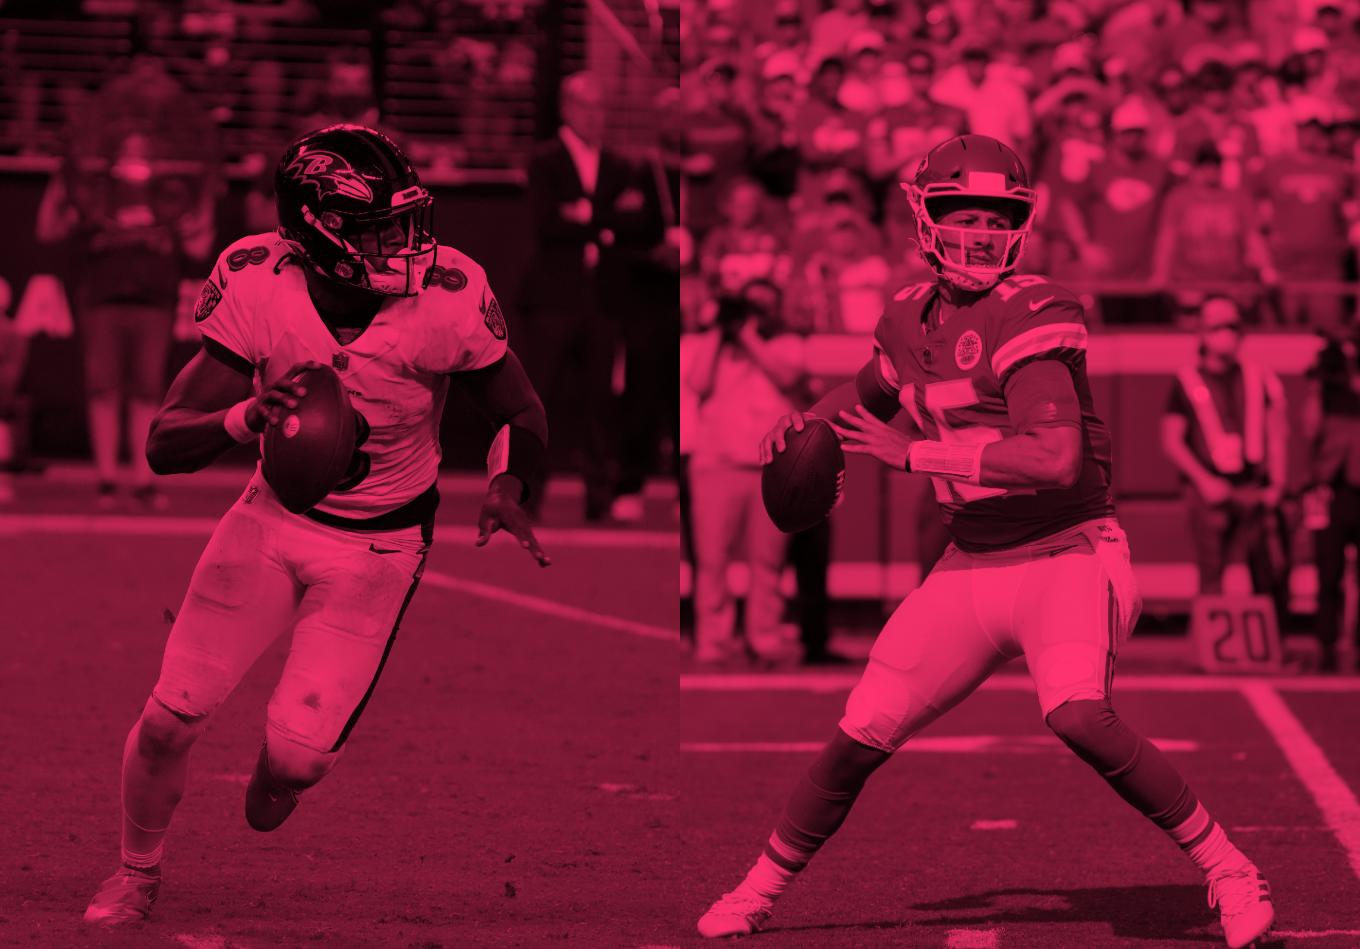 Sunday Night Showdown: Why Lamar Is in a Difficult Spot Heading Into a Duel With Mahomes